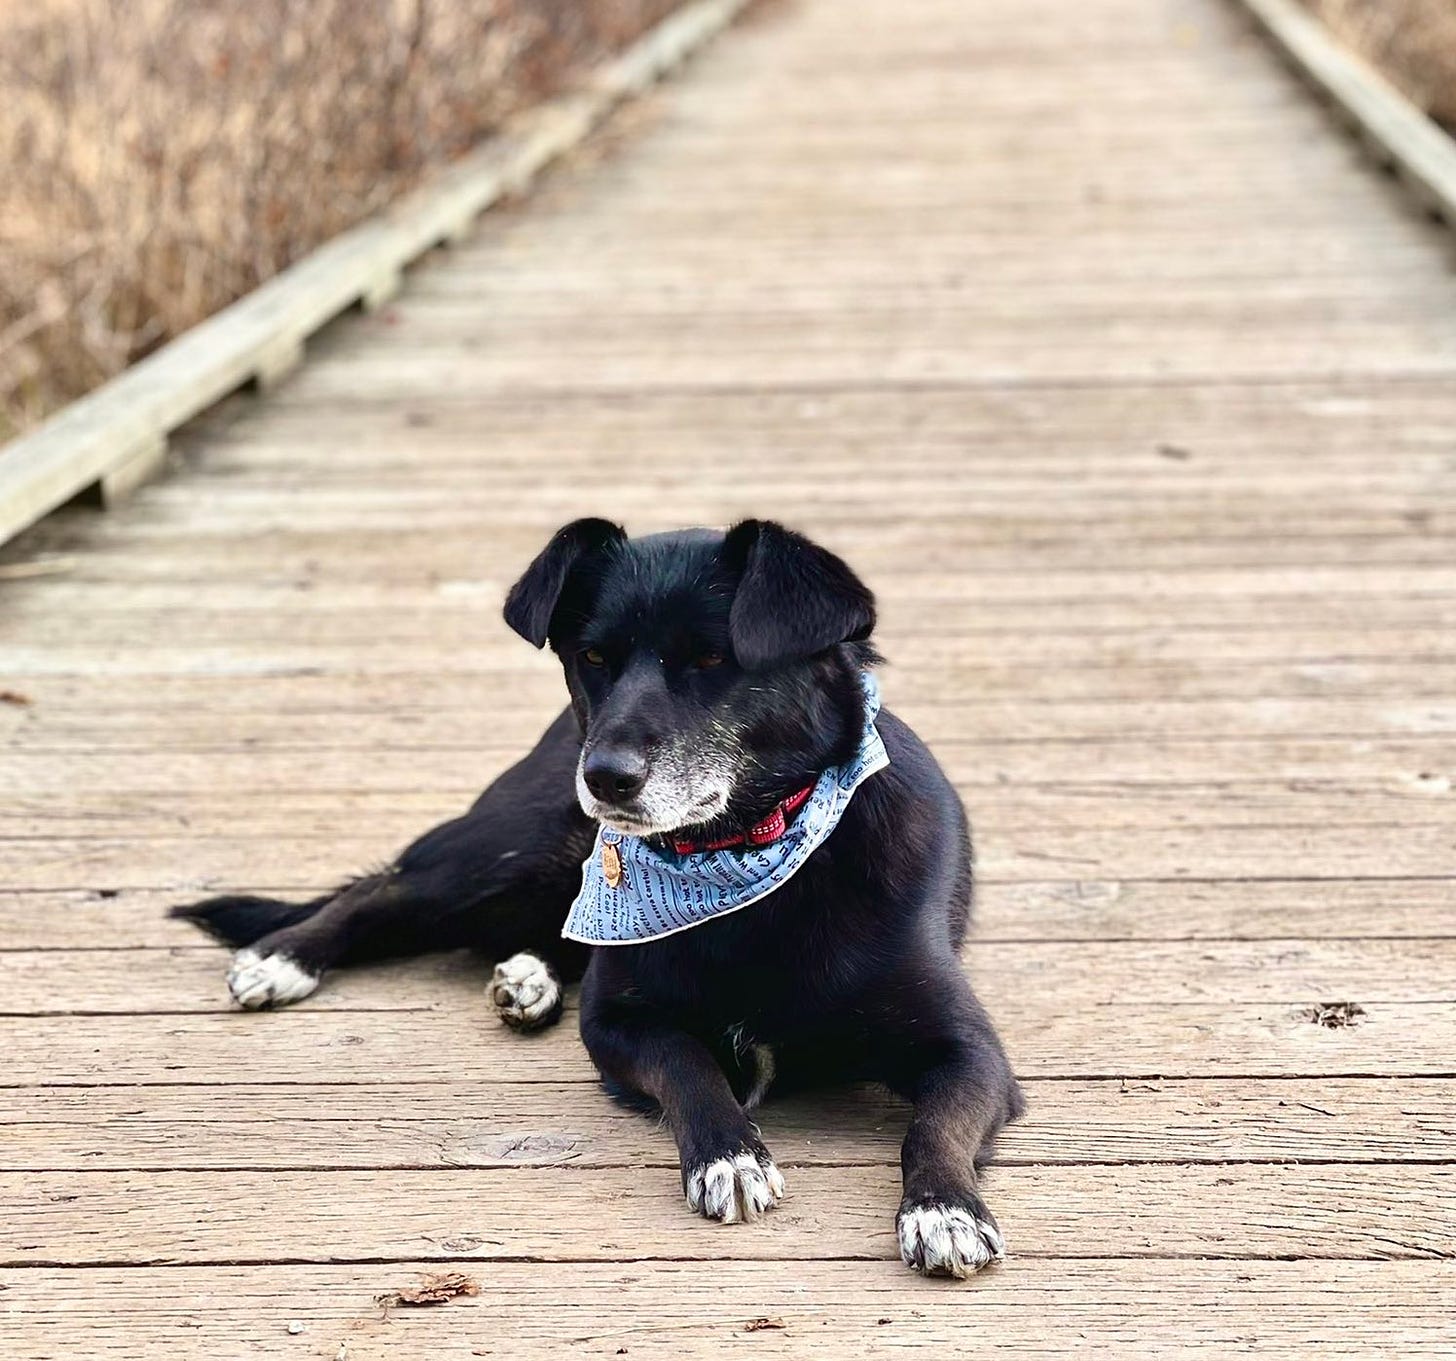 A black dog with white paws and muzzle rests on a wooden walkway. She is wearing a blue scarf and a red collar.